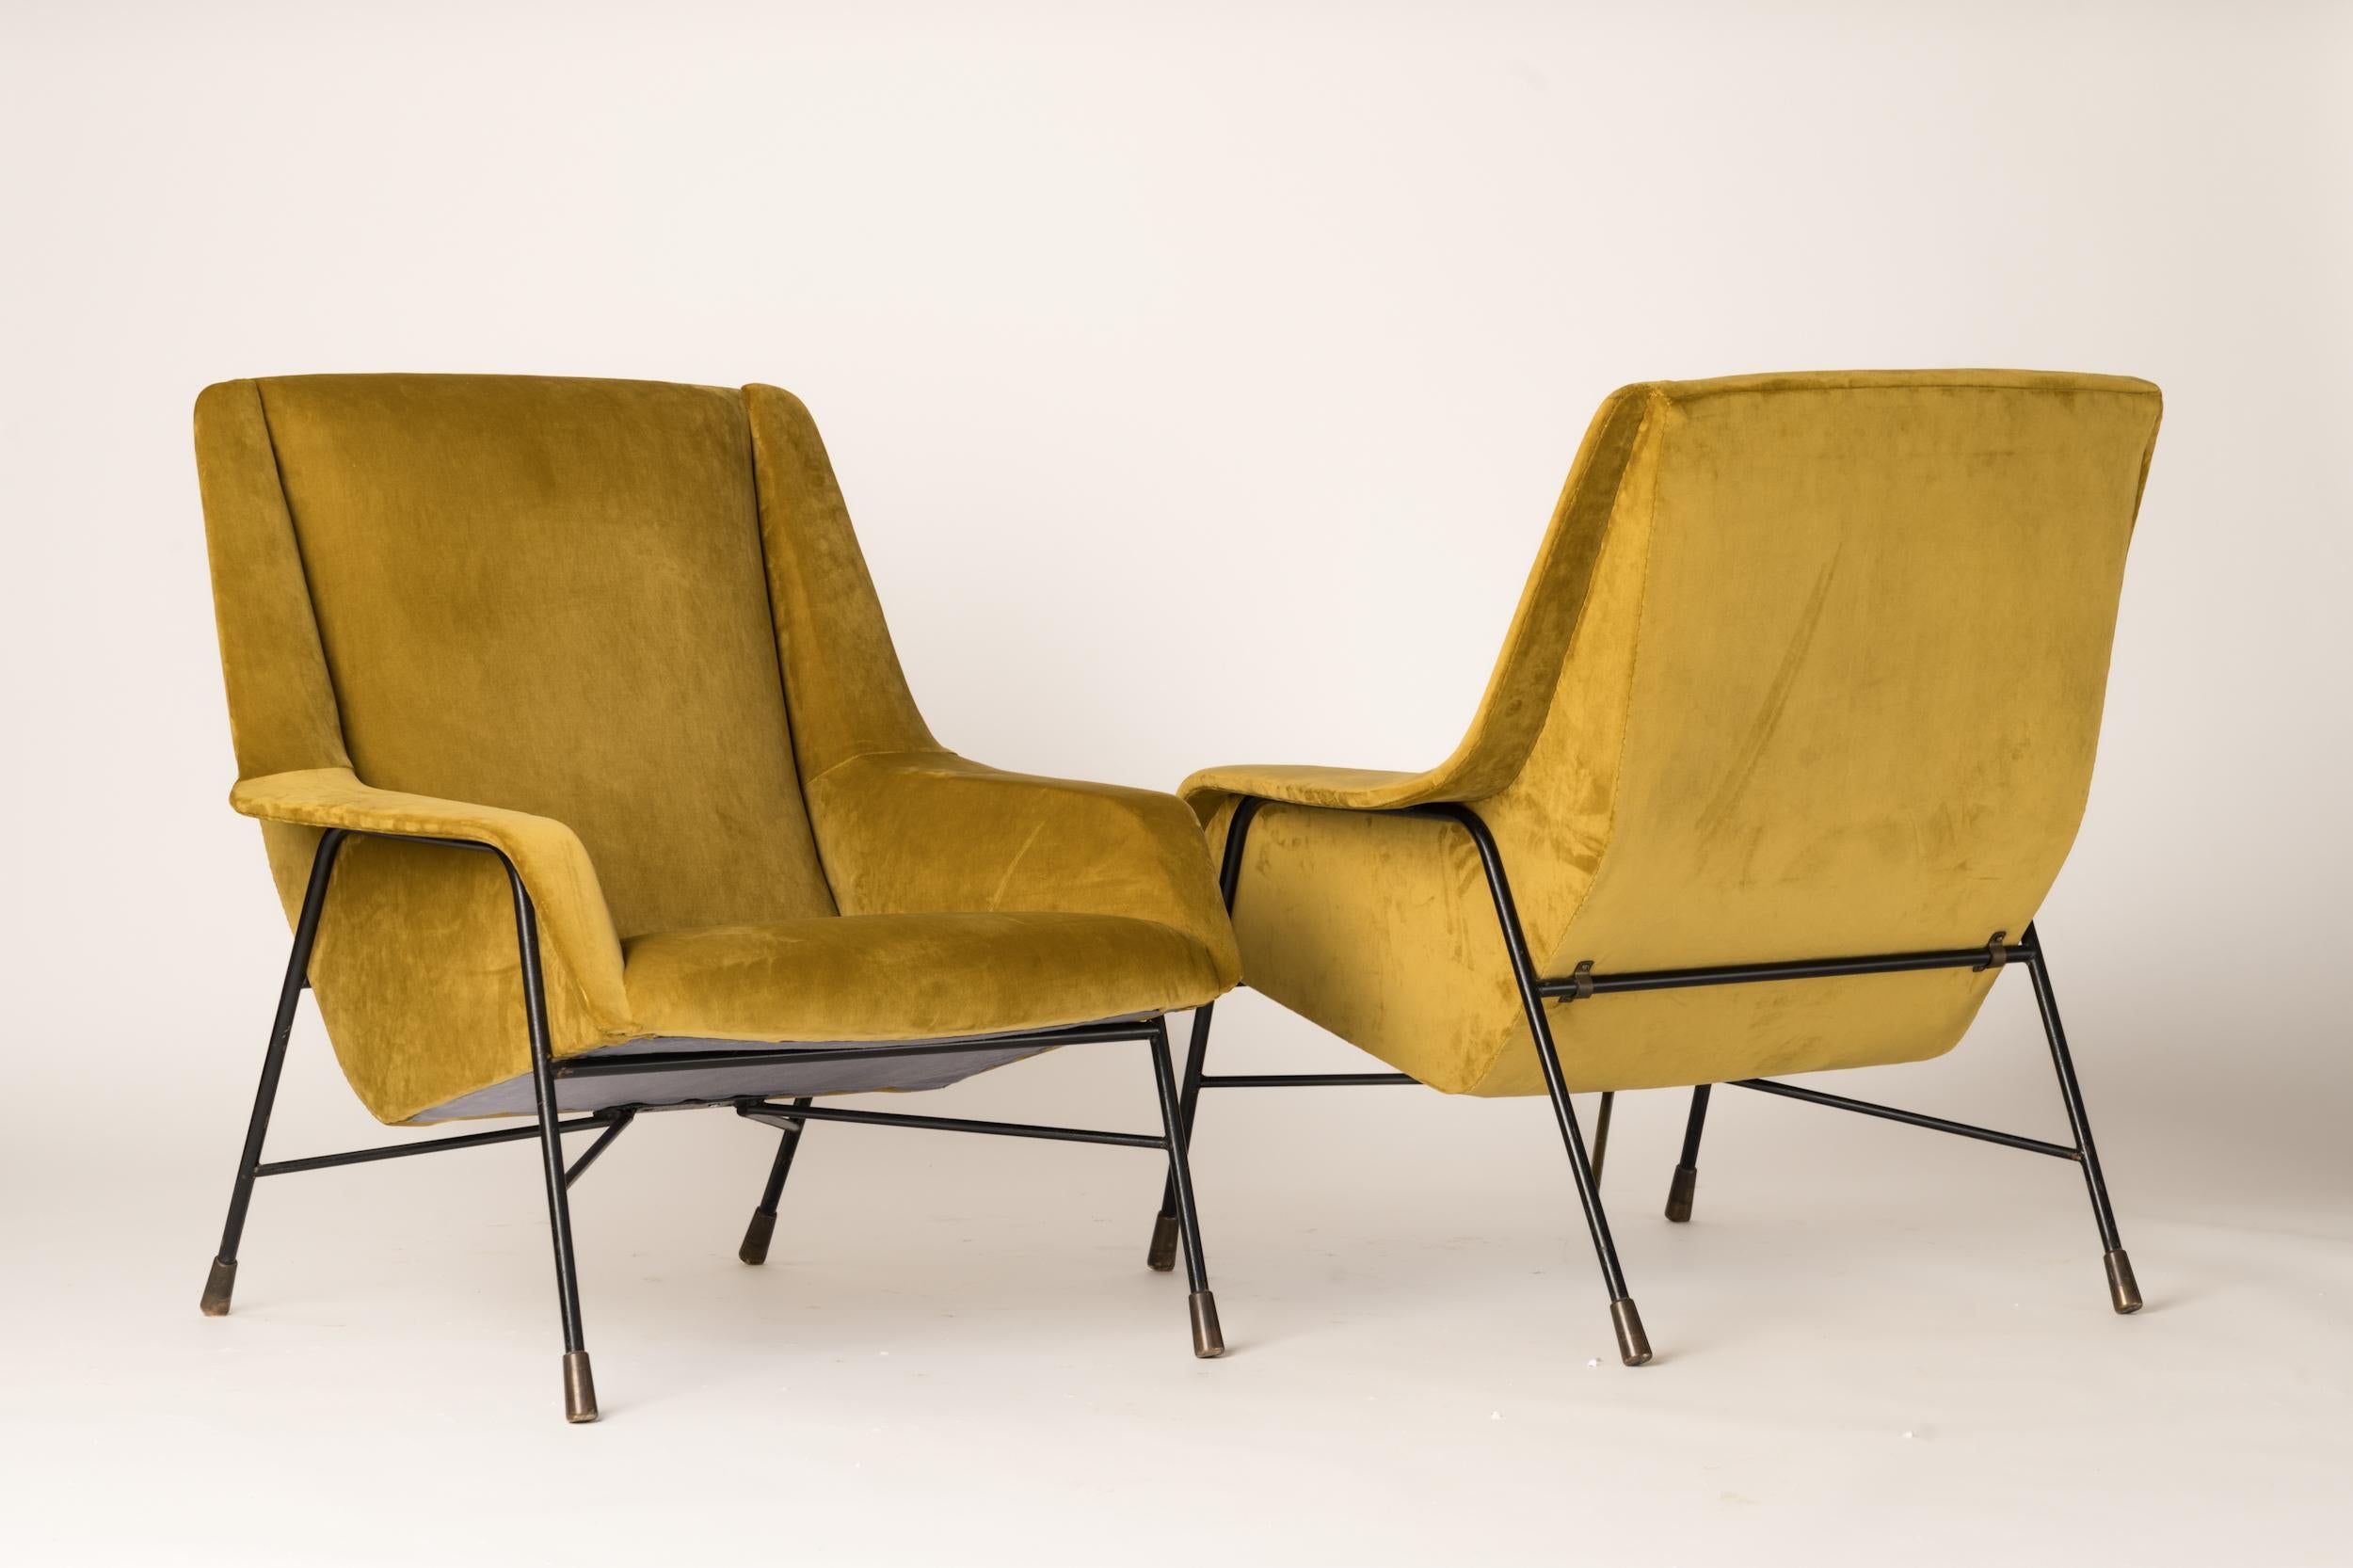 Belgian Pair of S12 Armchairs by Alfred Hendrickx for Belform, Belgium, 1958 For Sale